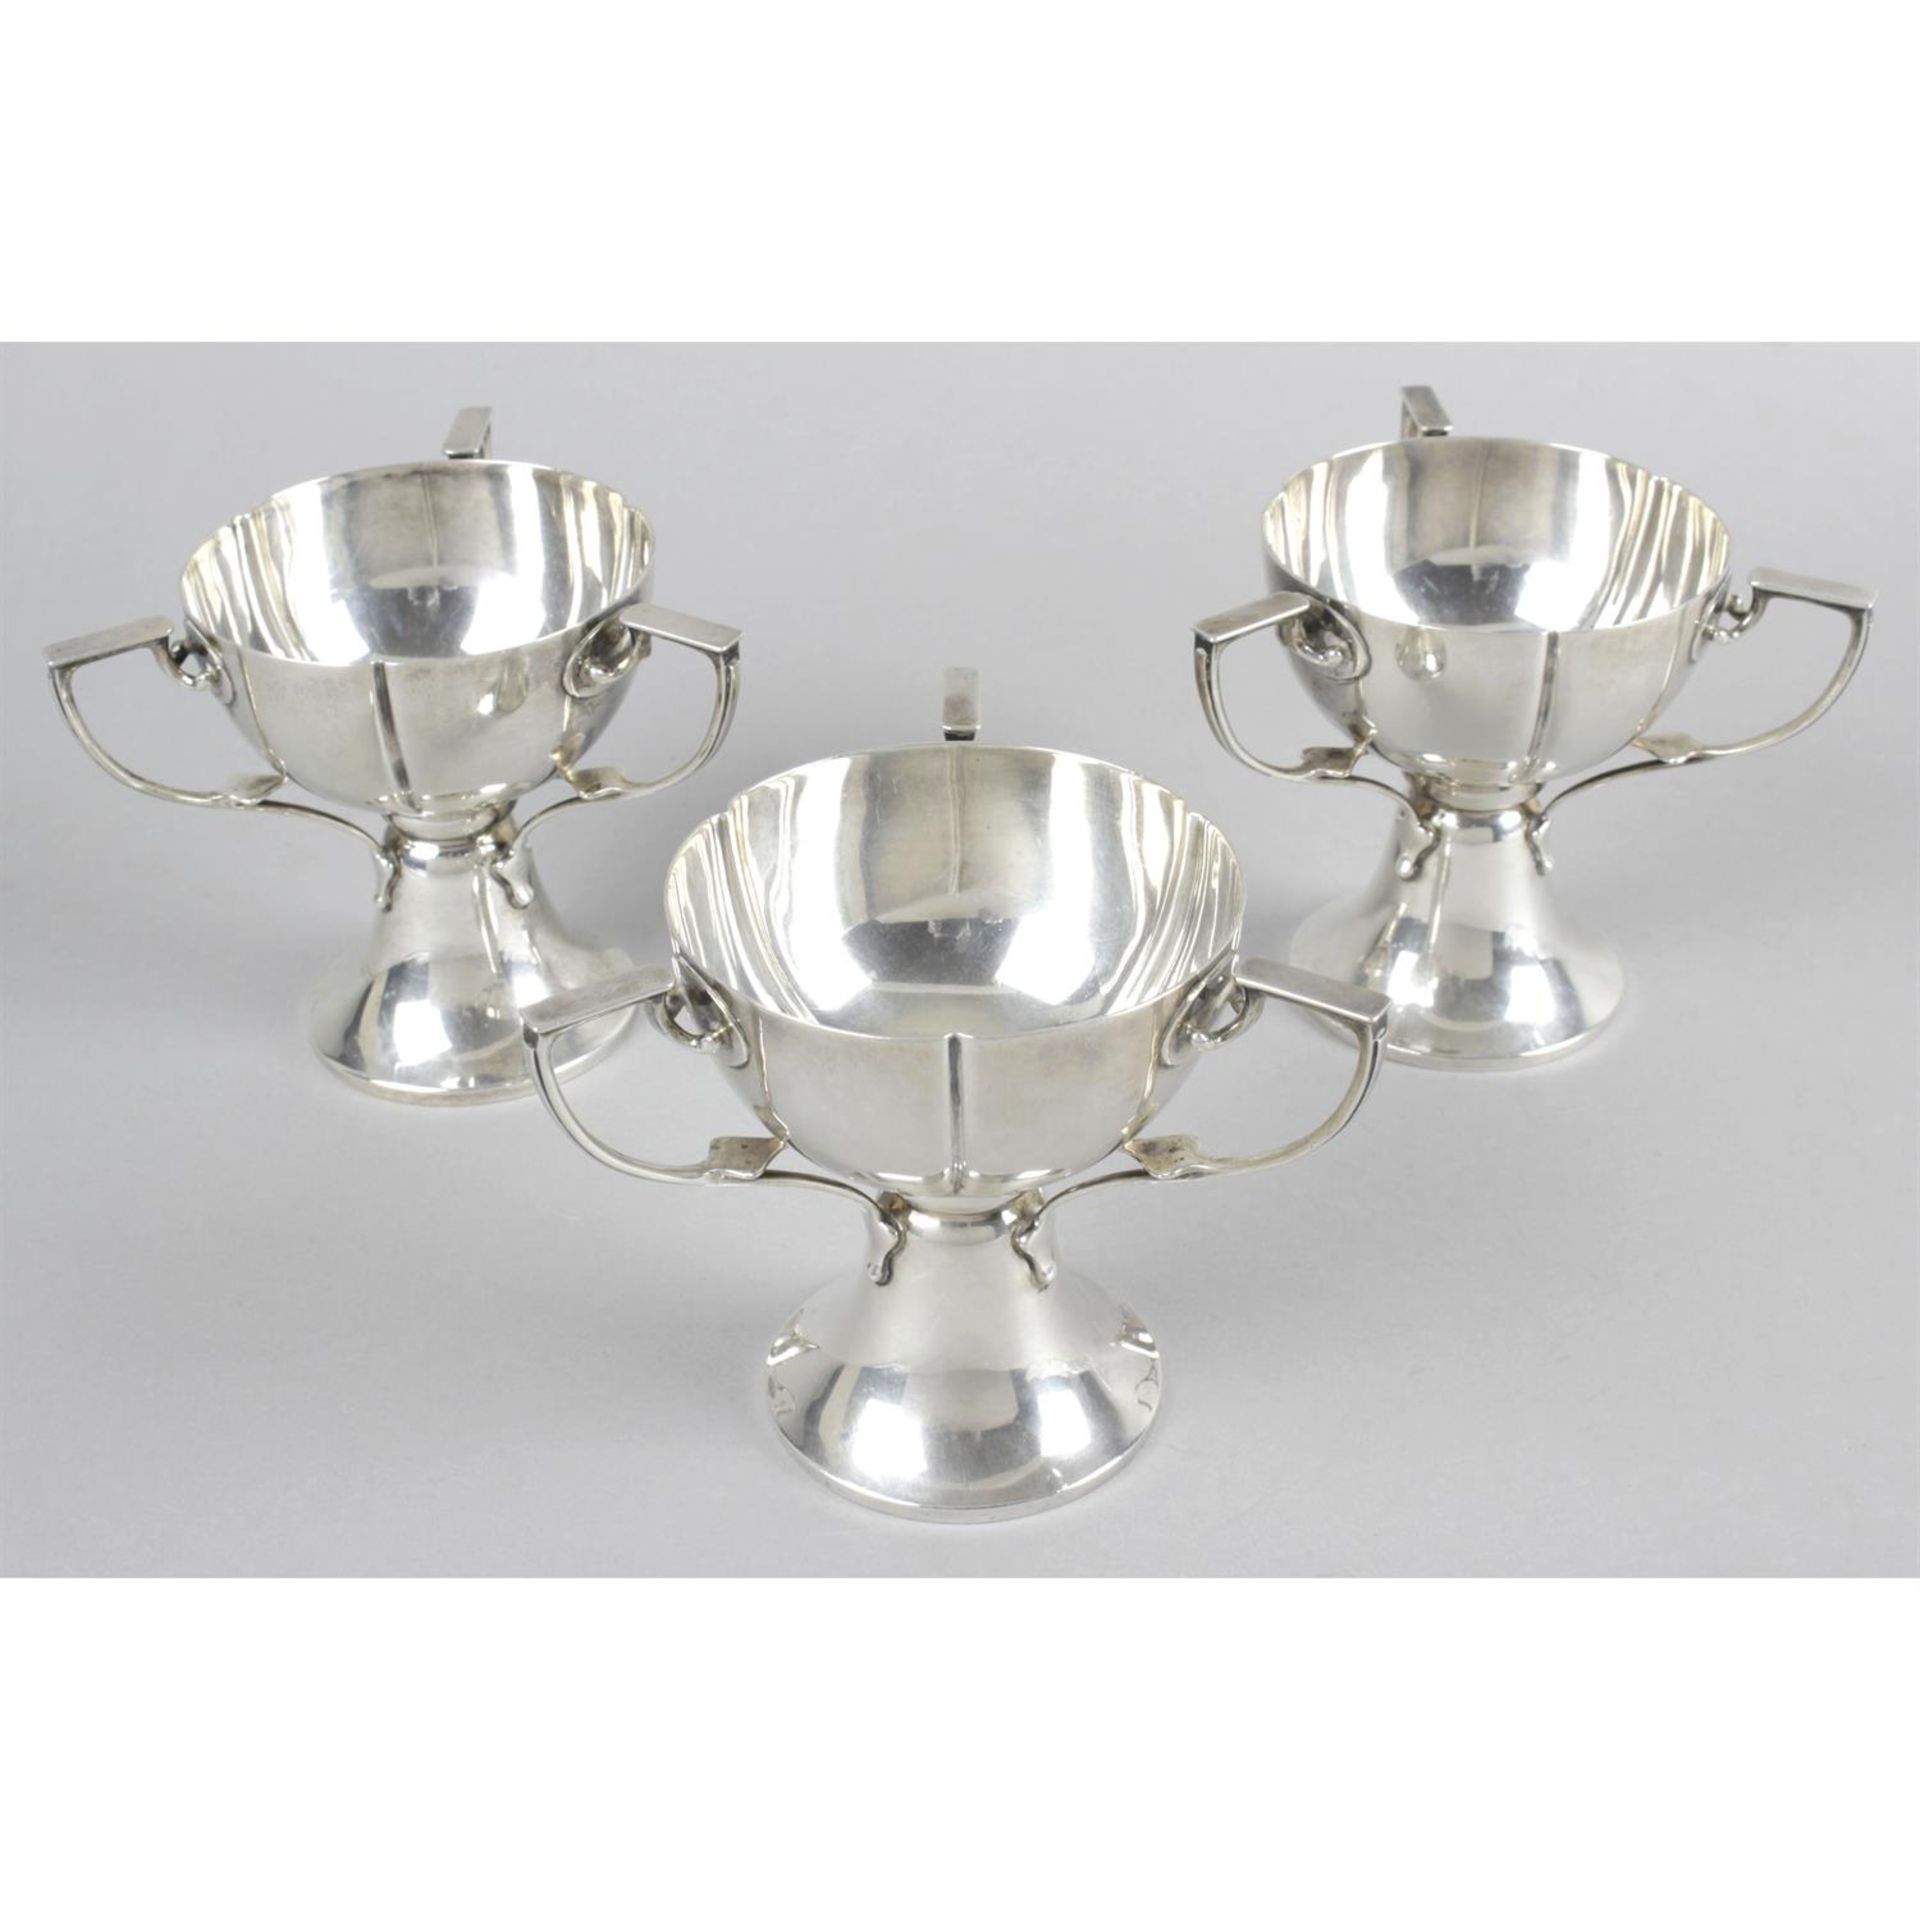 Three Edwardian silver pedestal cups, in Art Nouveau style, each with three handles. (3).